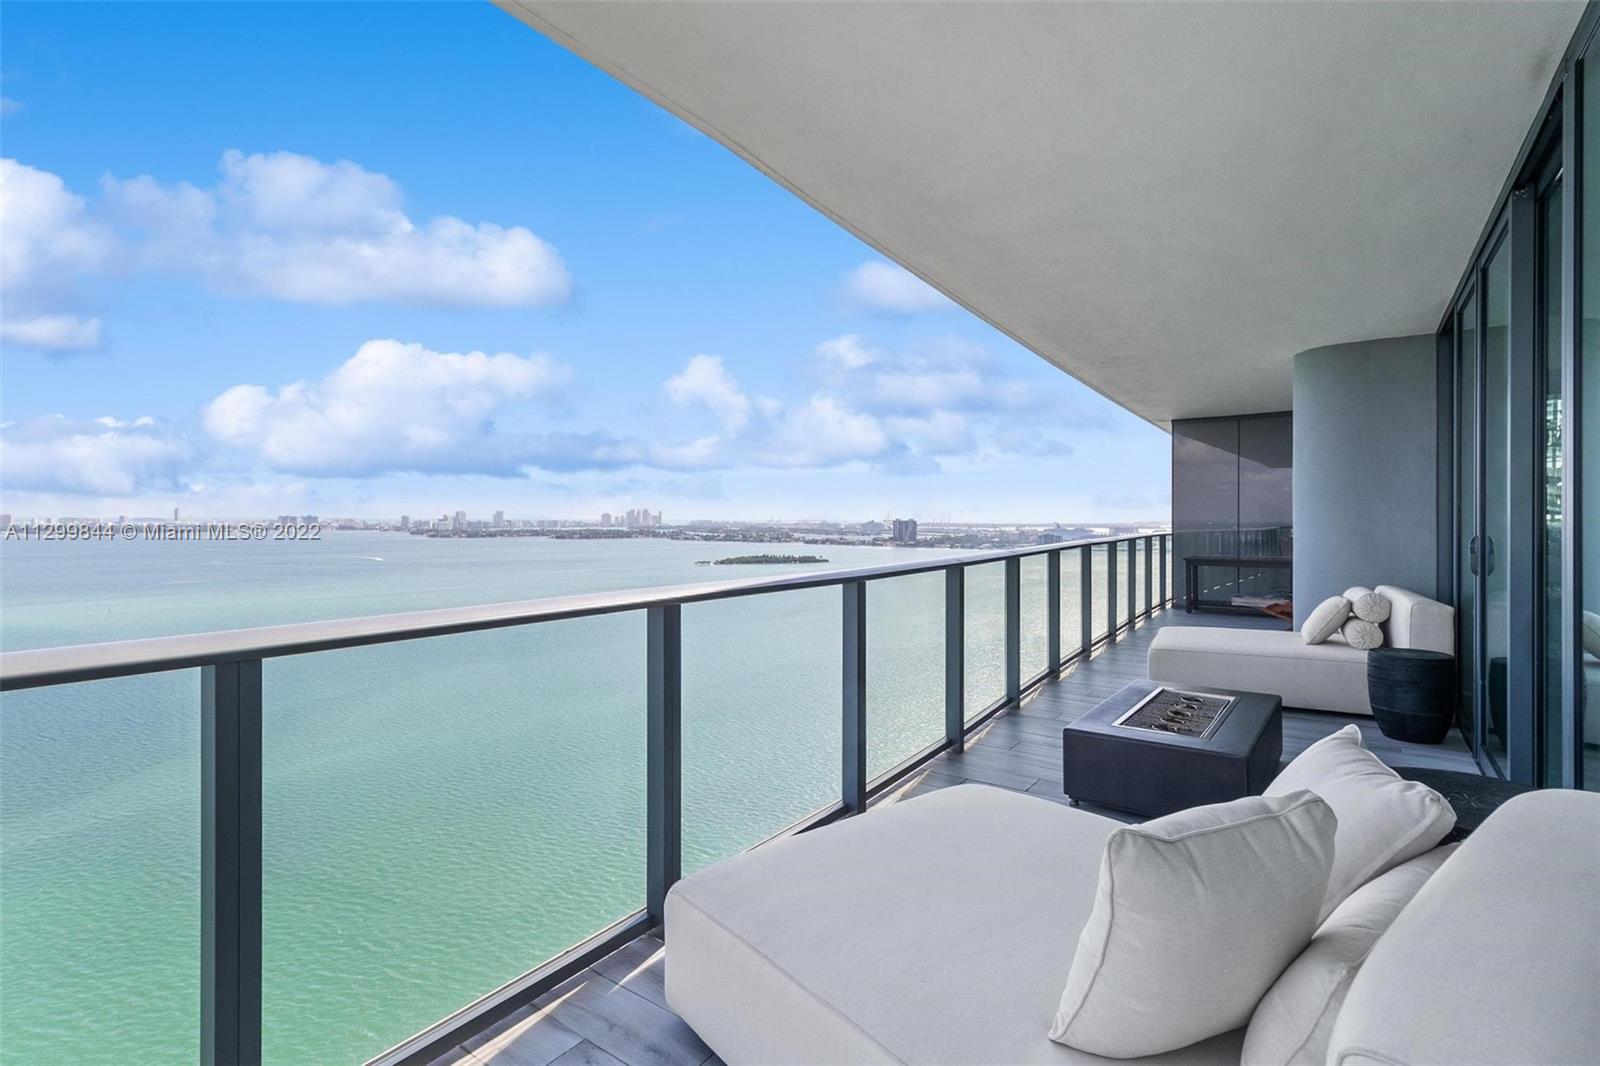 Gorgeous 3 bd / 3.5 bath corner Residence at the coveted ONE Paraiso with breathtaking unobstructed 